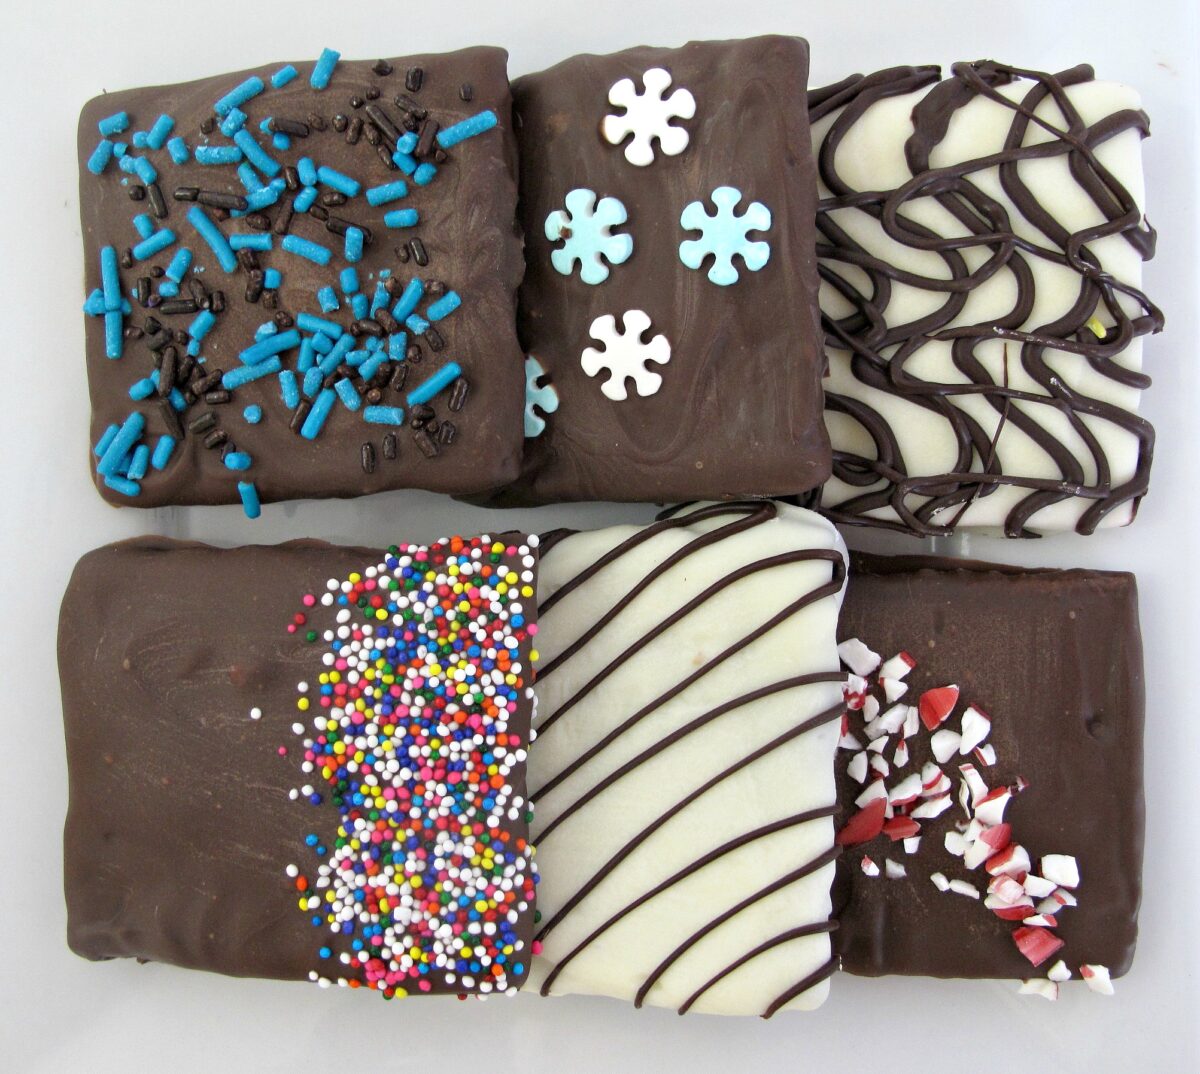 Chocolate Covered Graham Crackers decorated with sprinkles or drizzle.